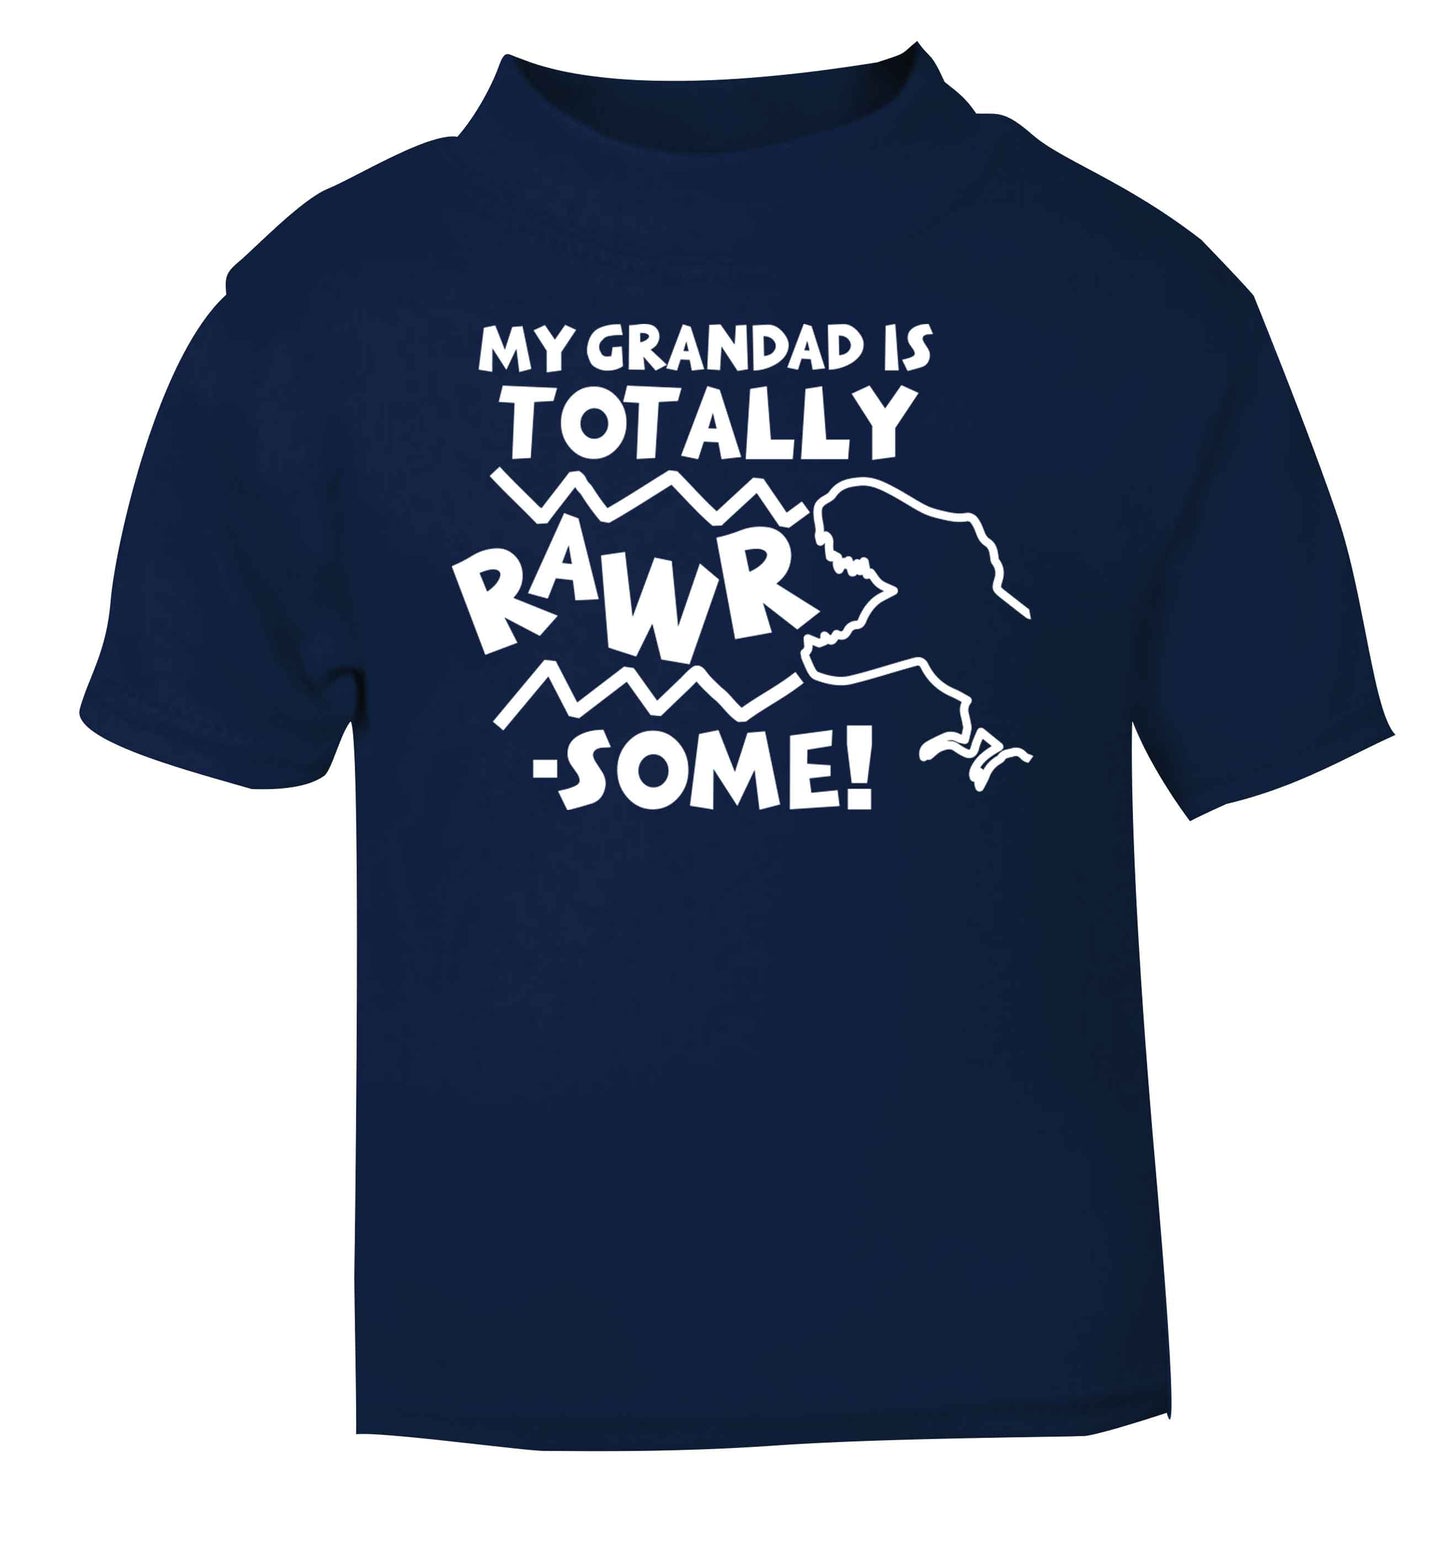 My grandad is totally rawrsome navy baby toddler Tshirt 2 Years